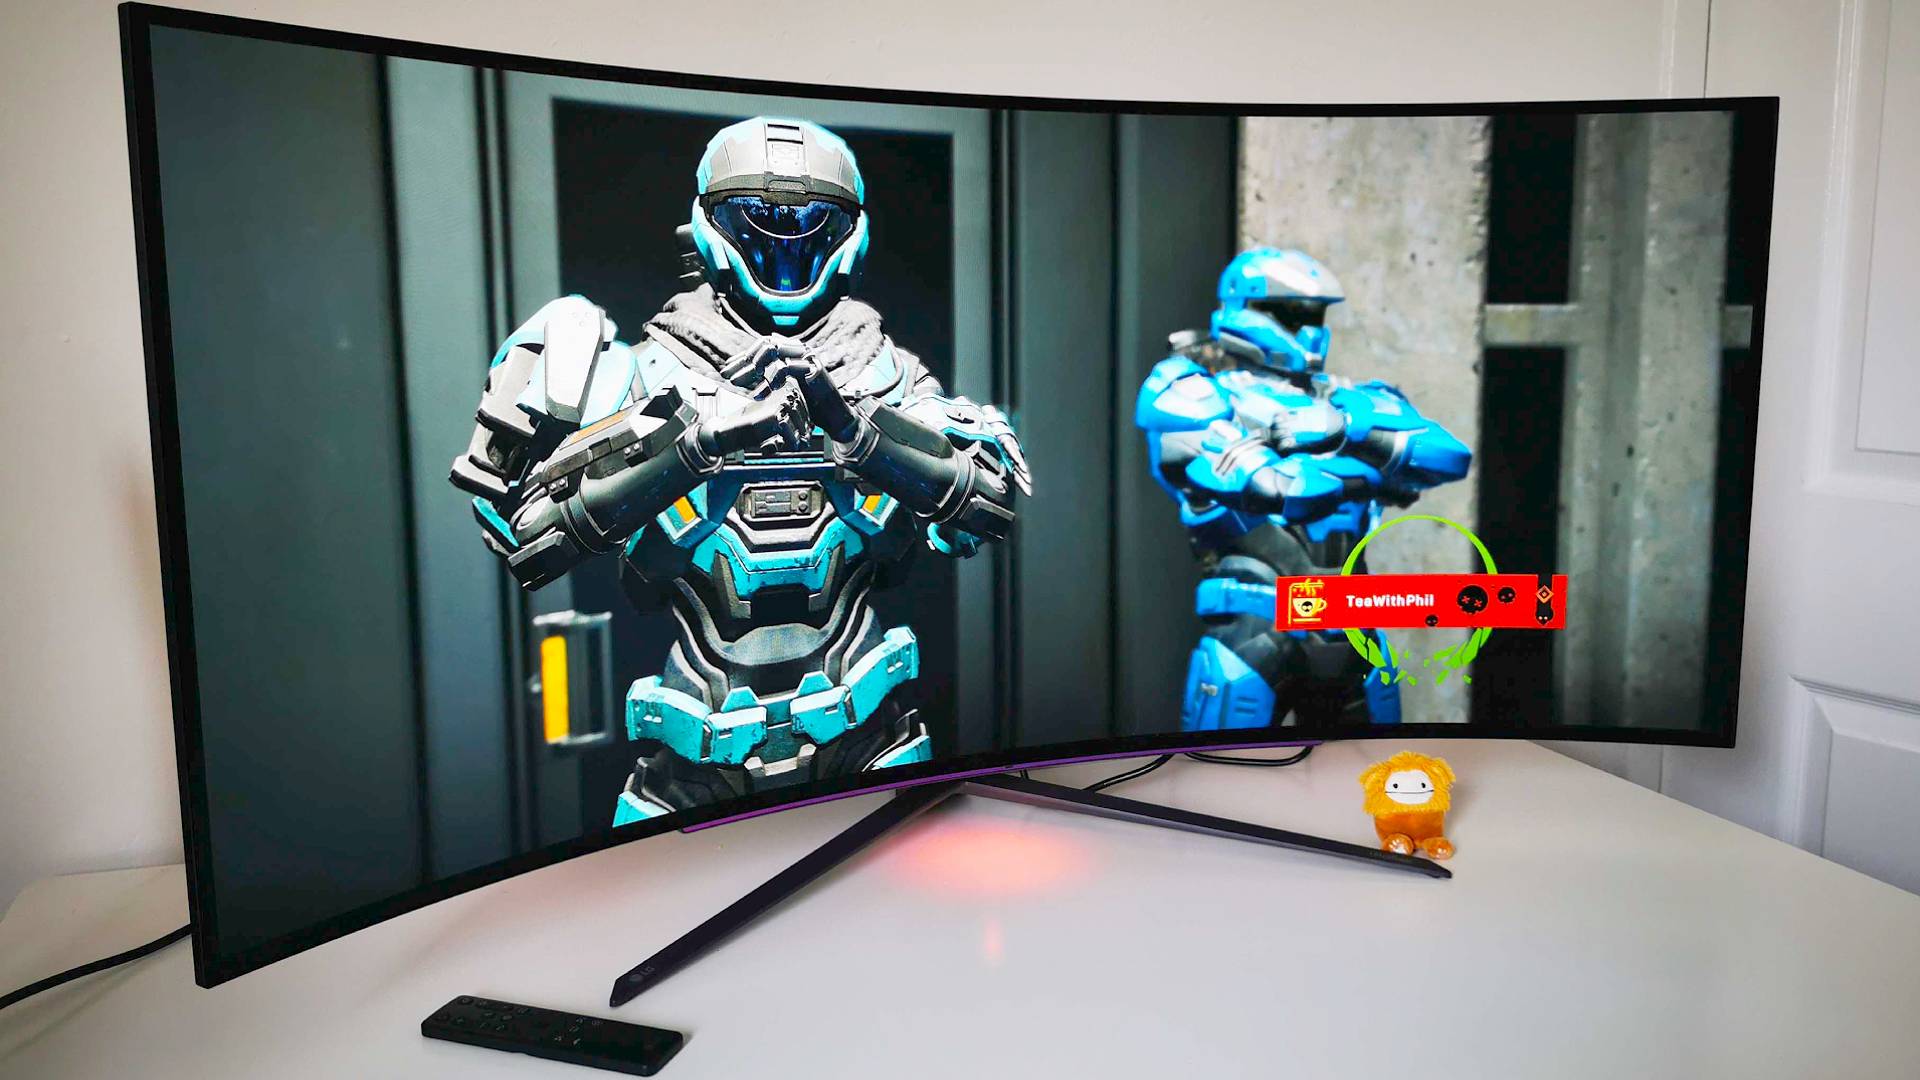 LG UltraGear 45GR95QE with Halo Infinite gameplay on screen